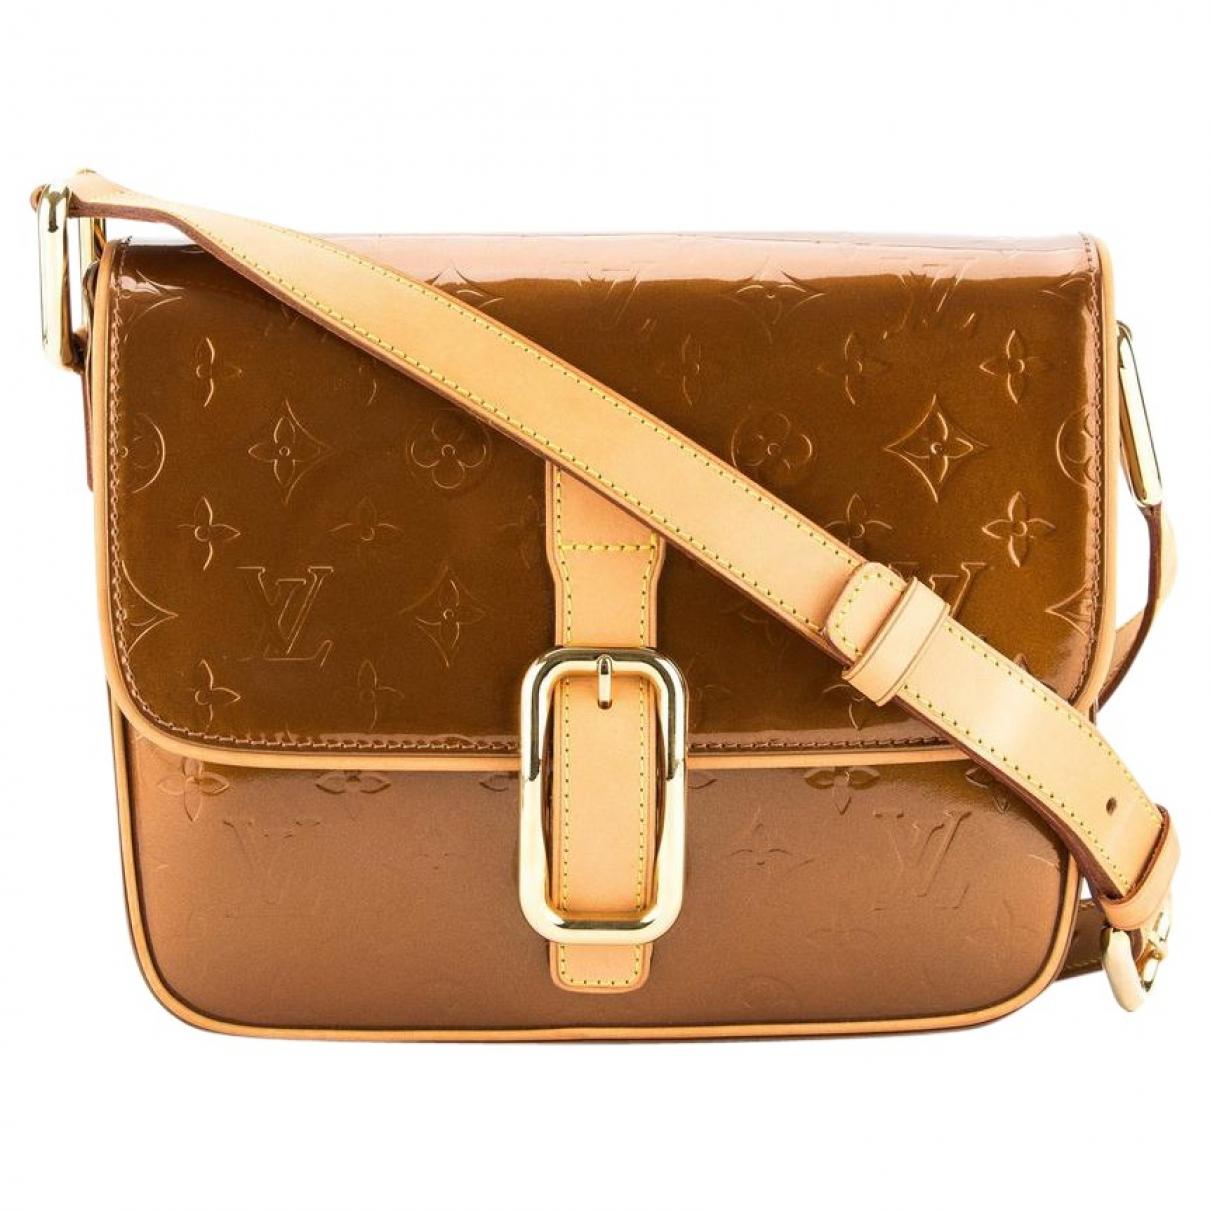 Lyst - Louis Vuitton Christie Patent Leather Crossbody Bag in Brown